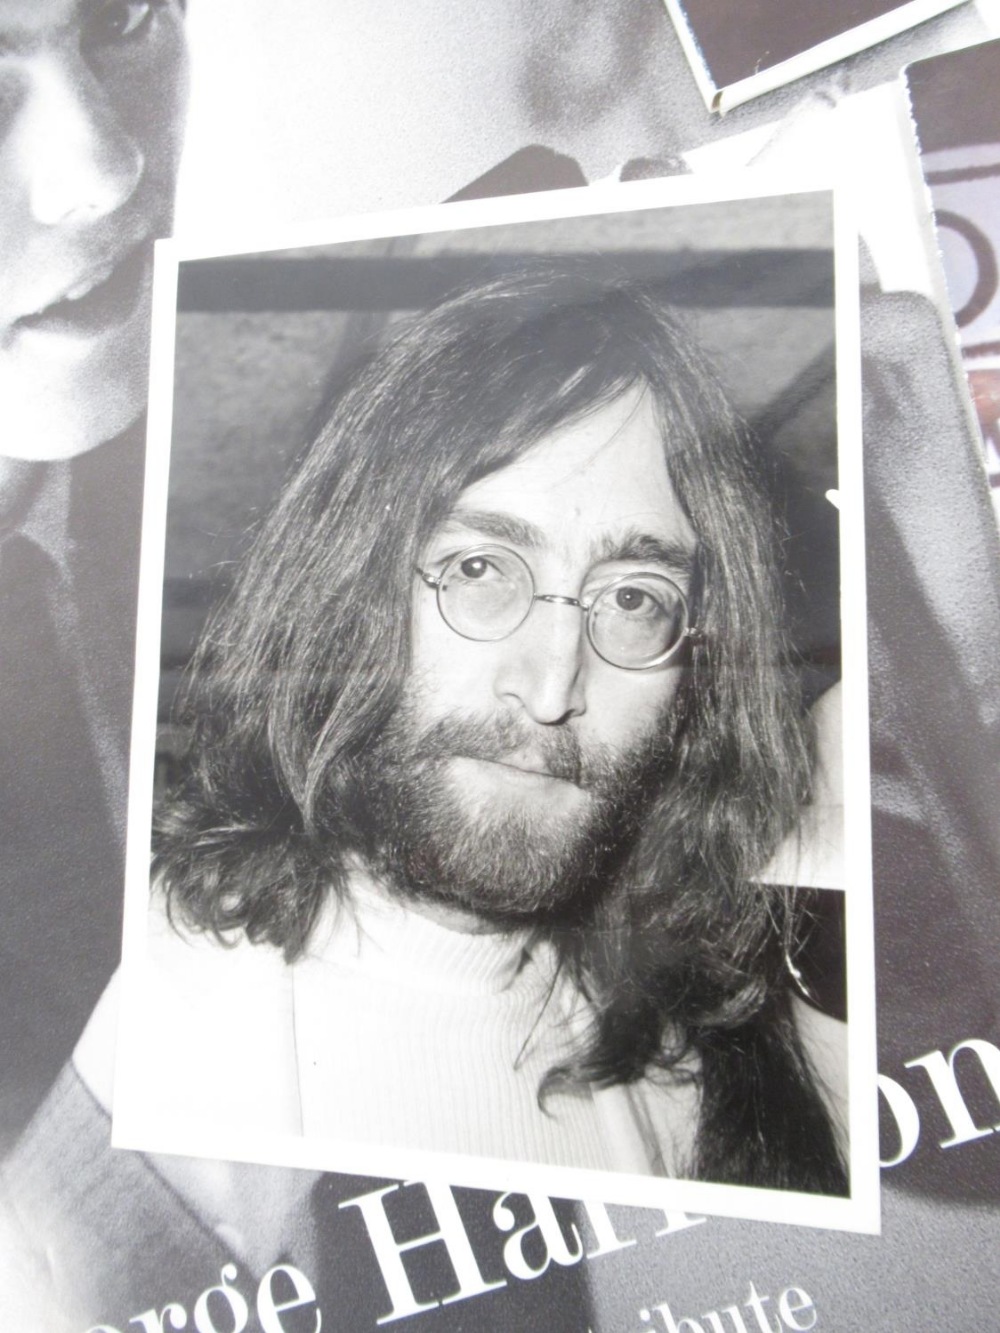 Beatles - John Lennon photograph taken by G.Stroud 10th December 1969 from the Evening Standard - Image 2 of 6